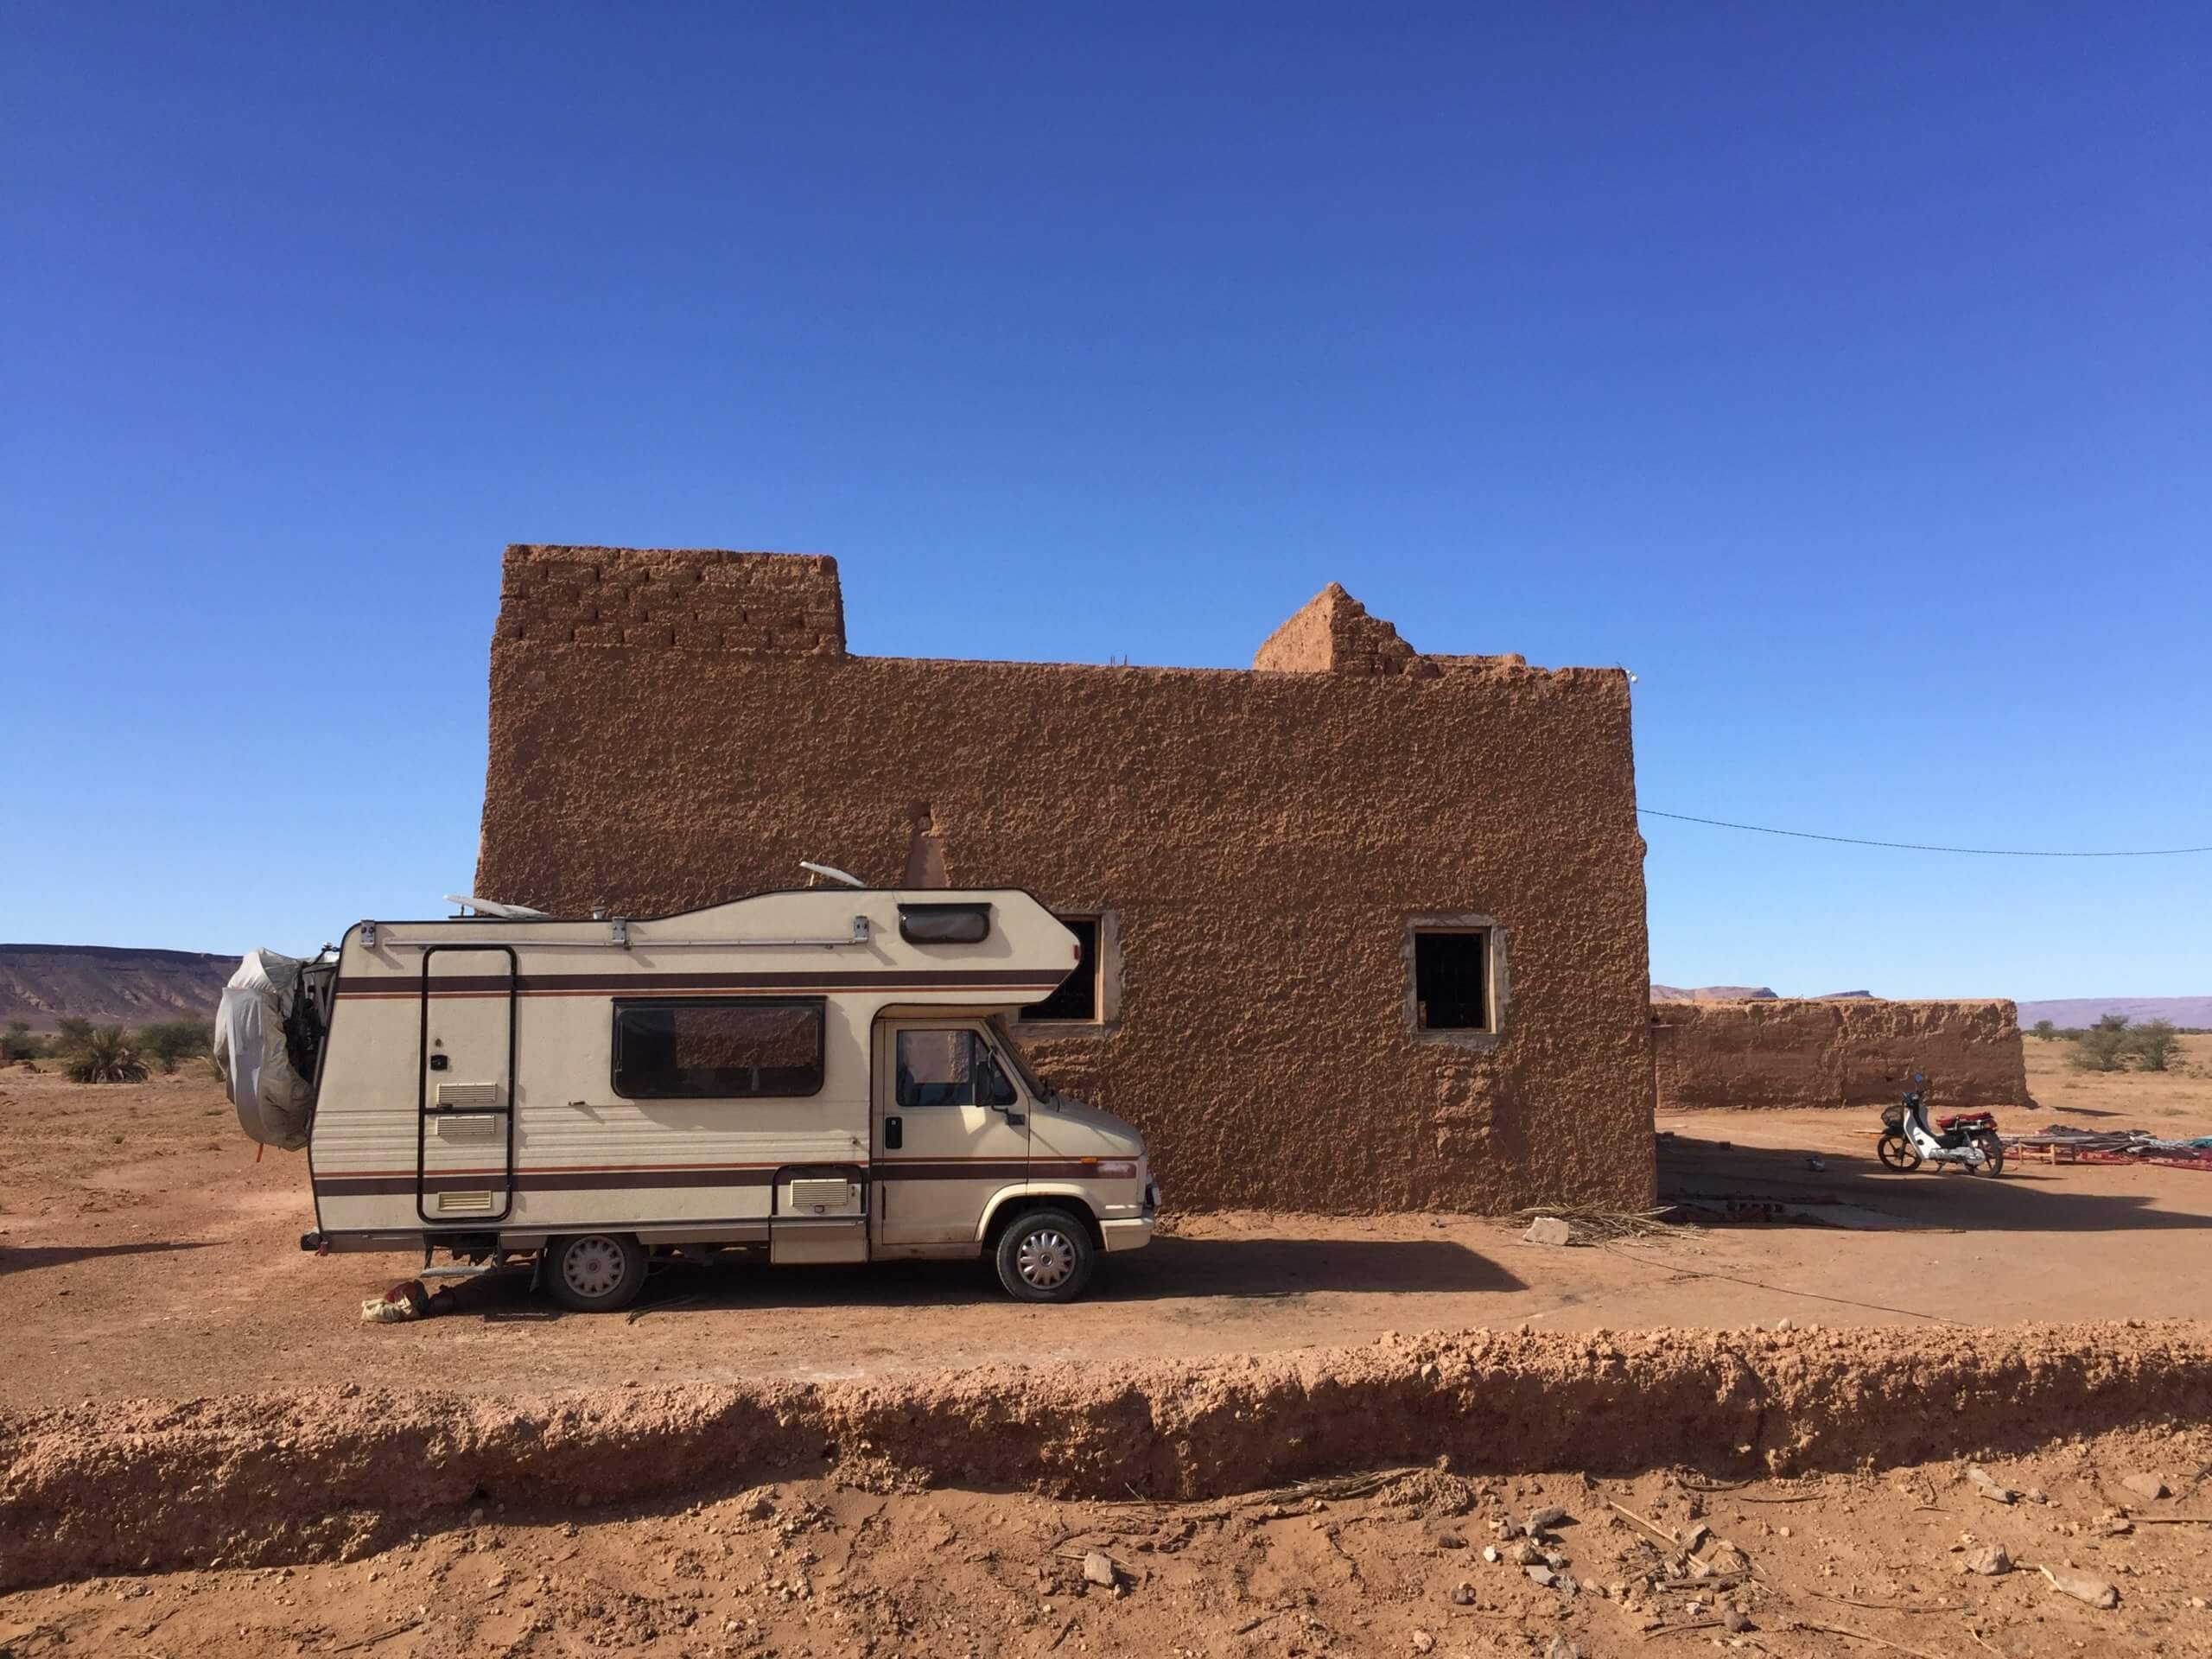 Campervan parked outside a sand building in a desert with bright blue sky